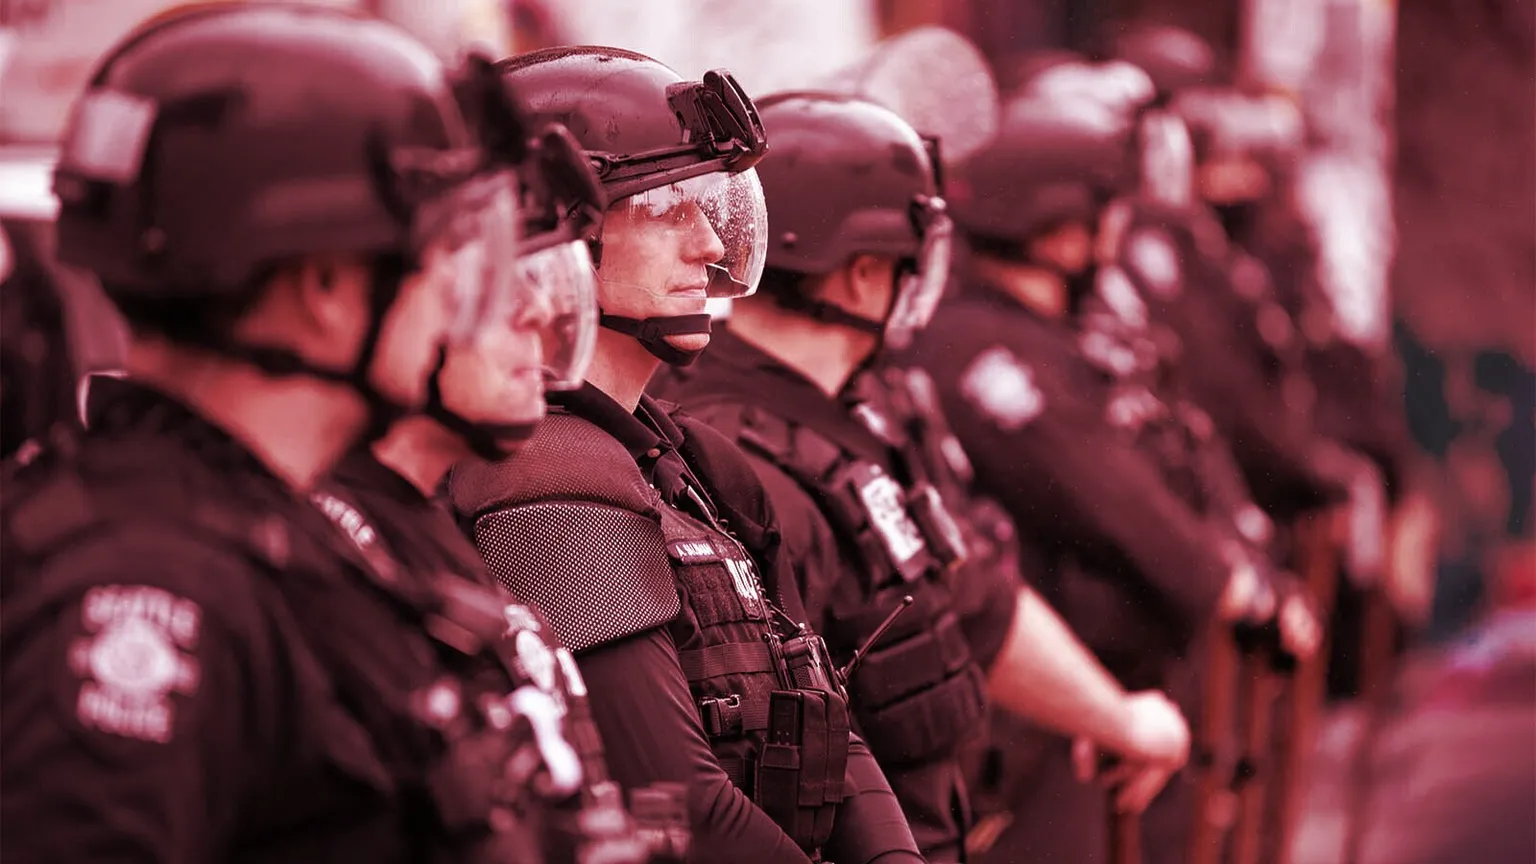 Civil unrest: good for Bitcoin? Image: Shutterstock